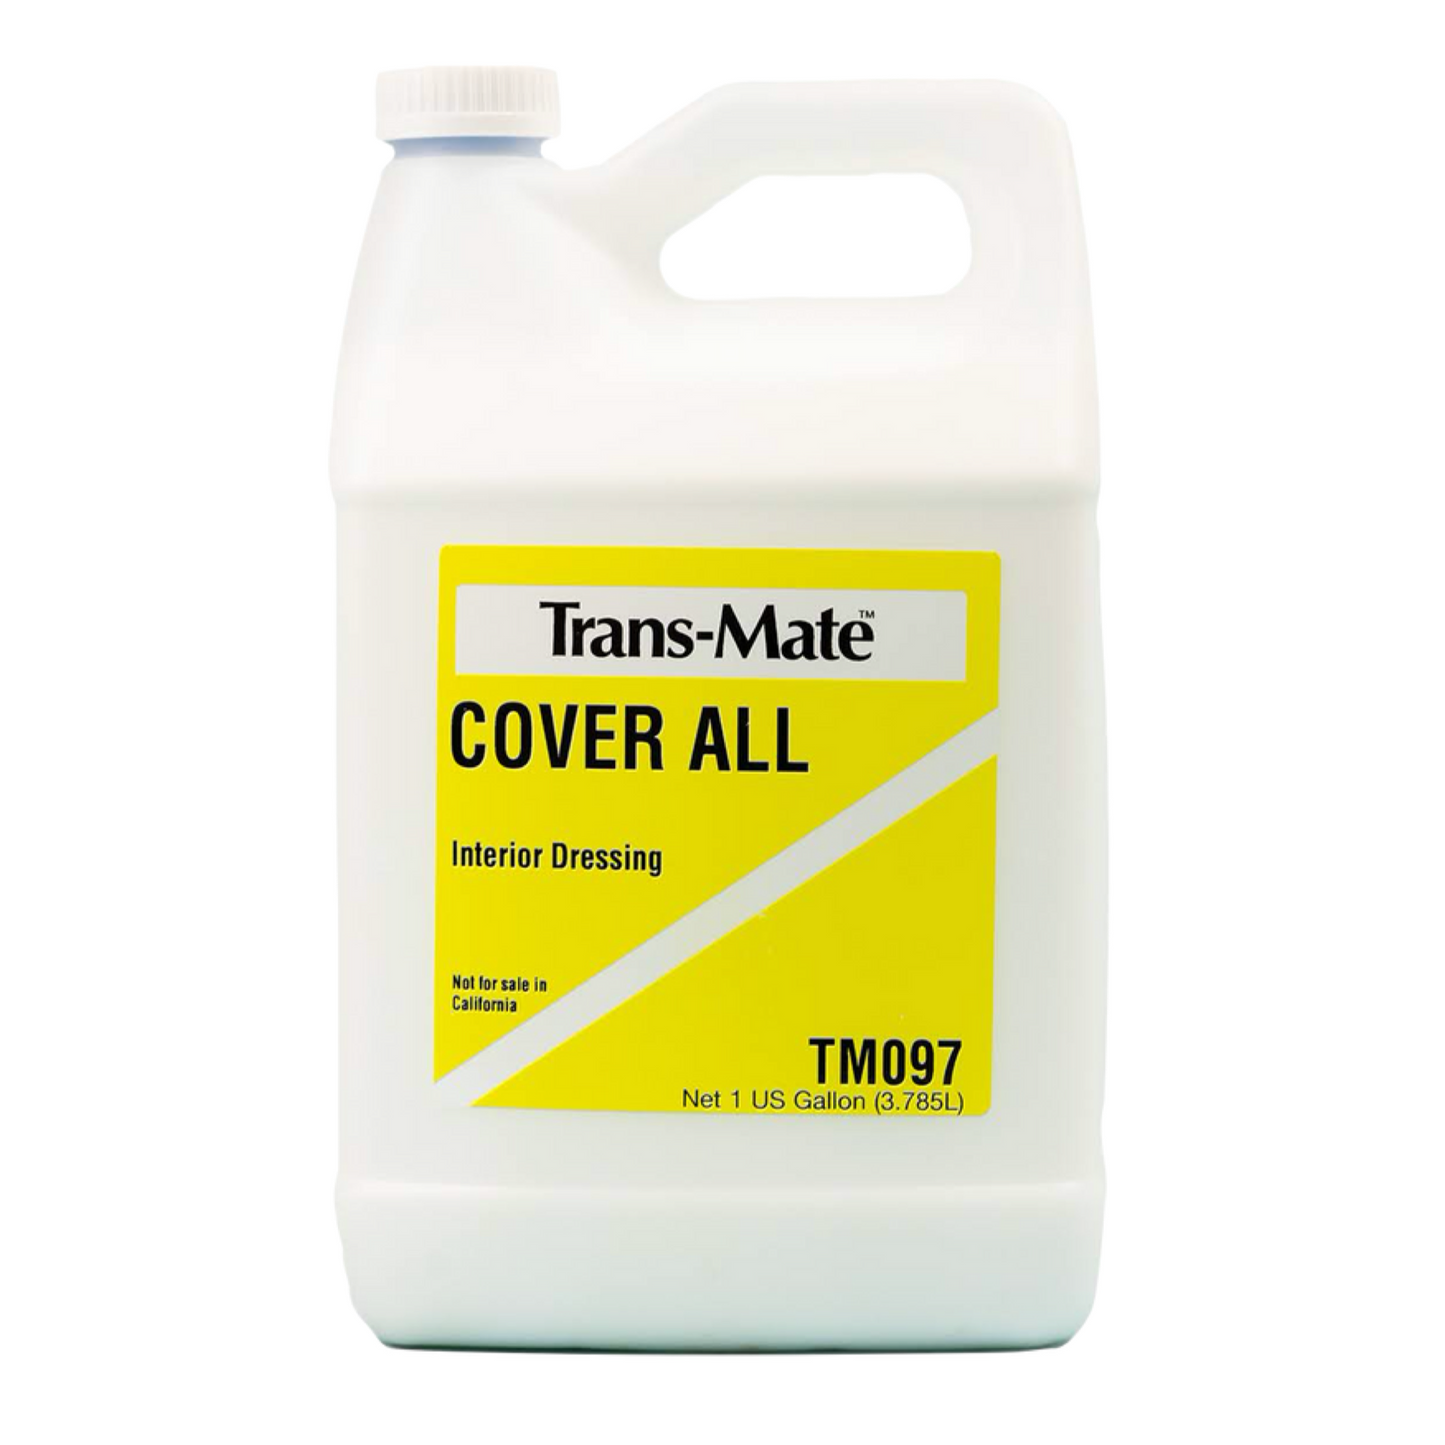 Trans-Mate Cover All